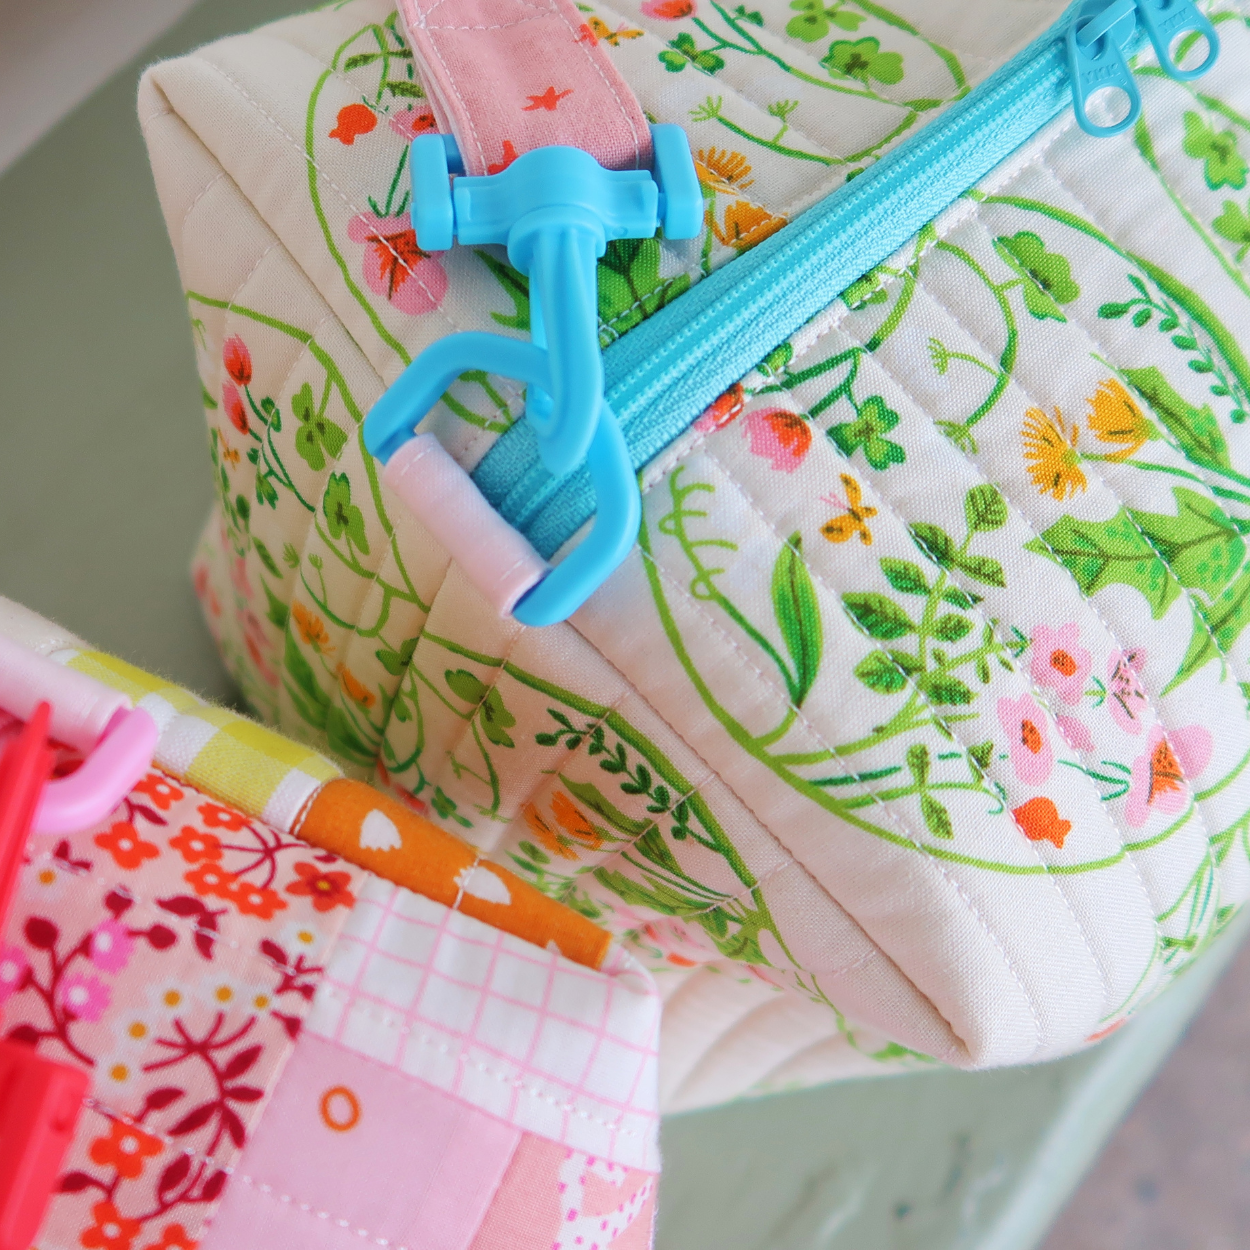 Simply Done Zipper Colorful Sandwich Bags